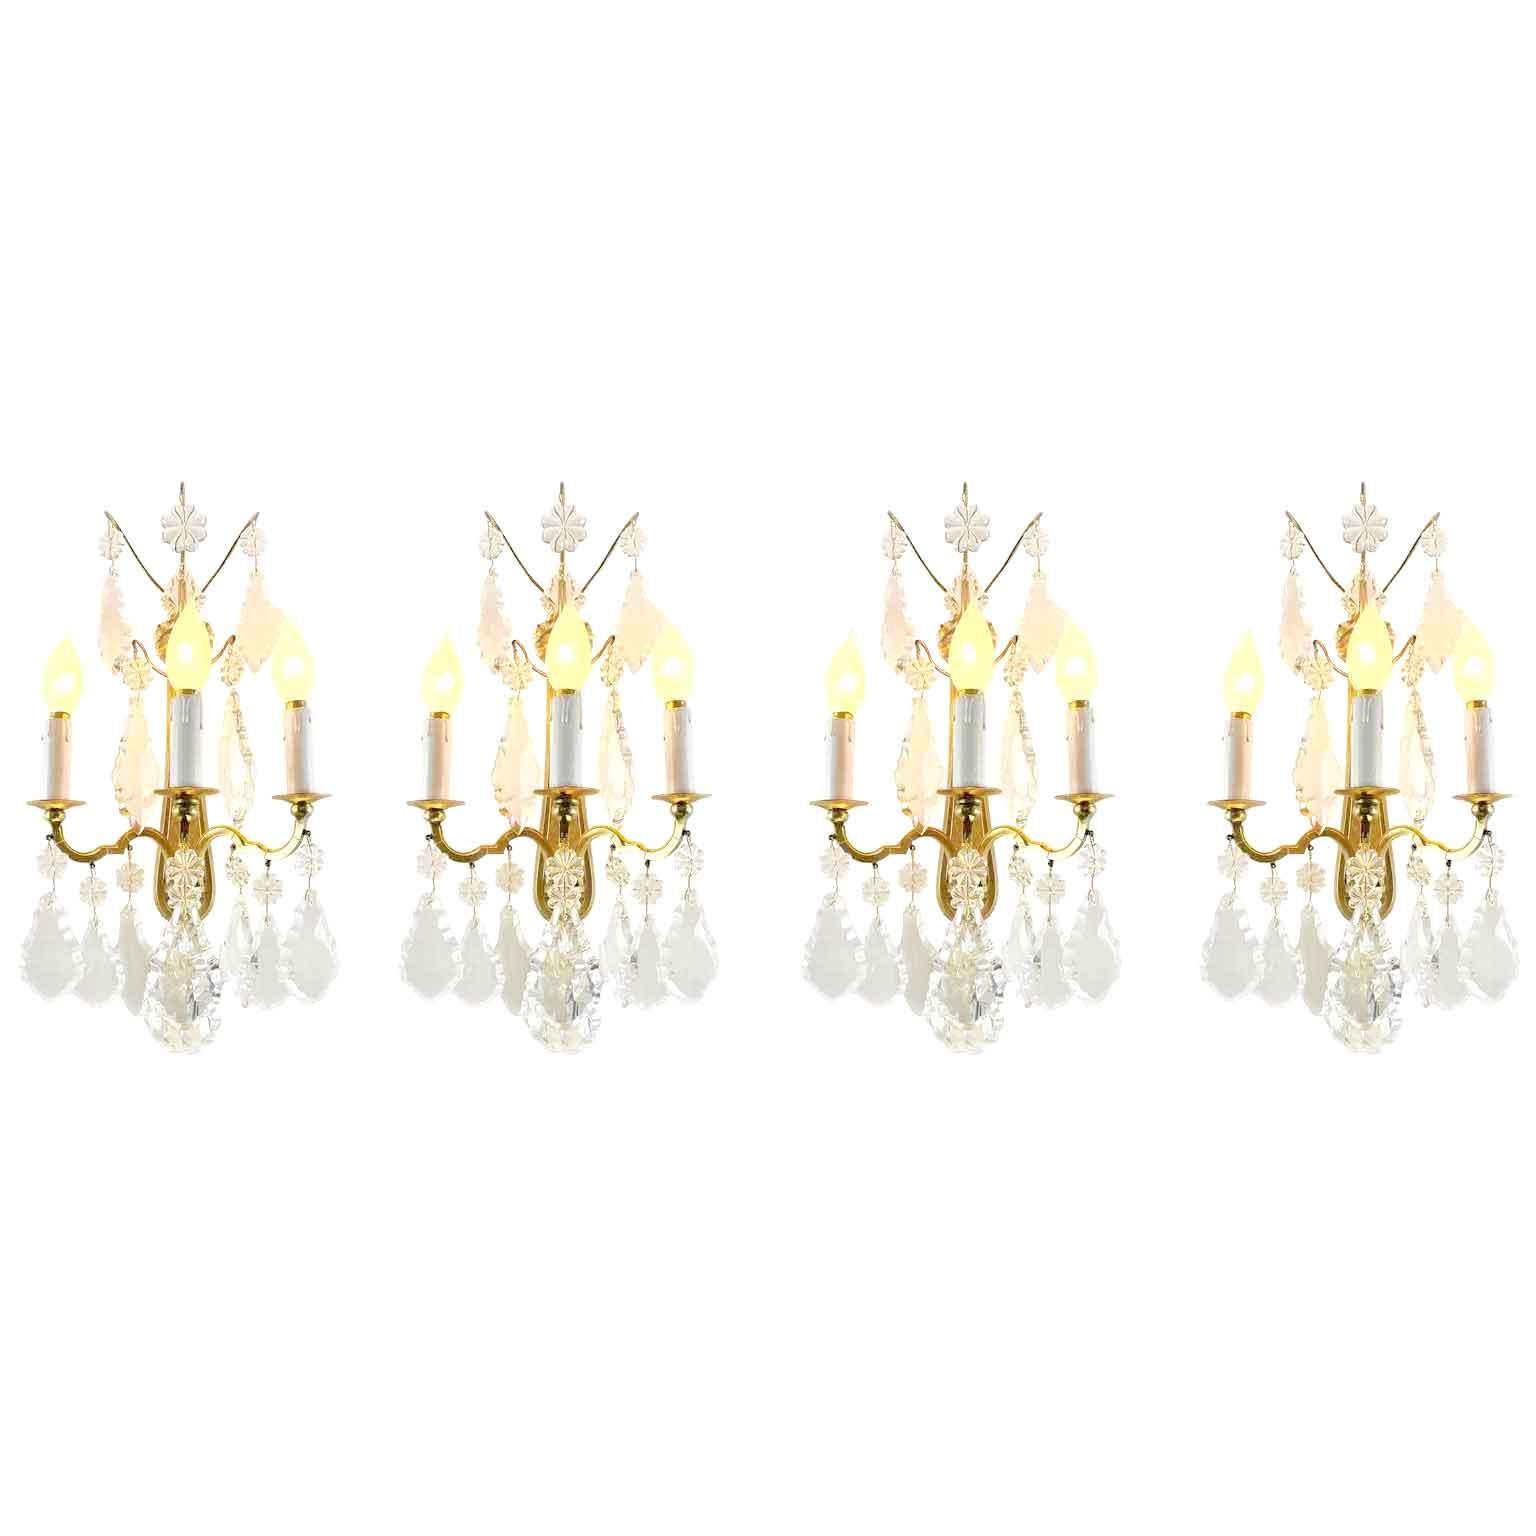 Set of Four Baccarat Crystal Sconces 20th Century French Gilt Wall Lights 11